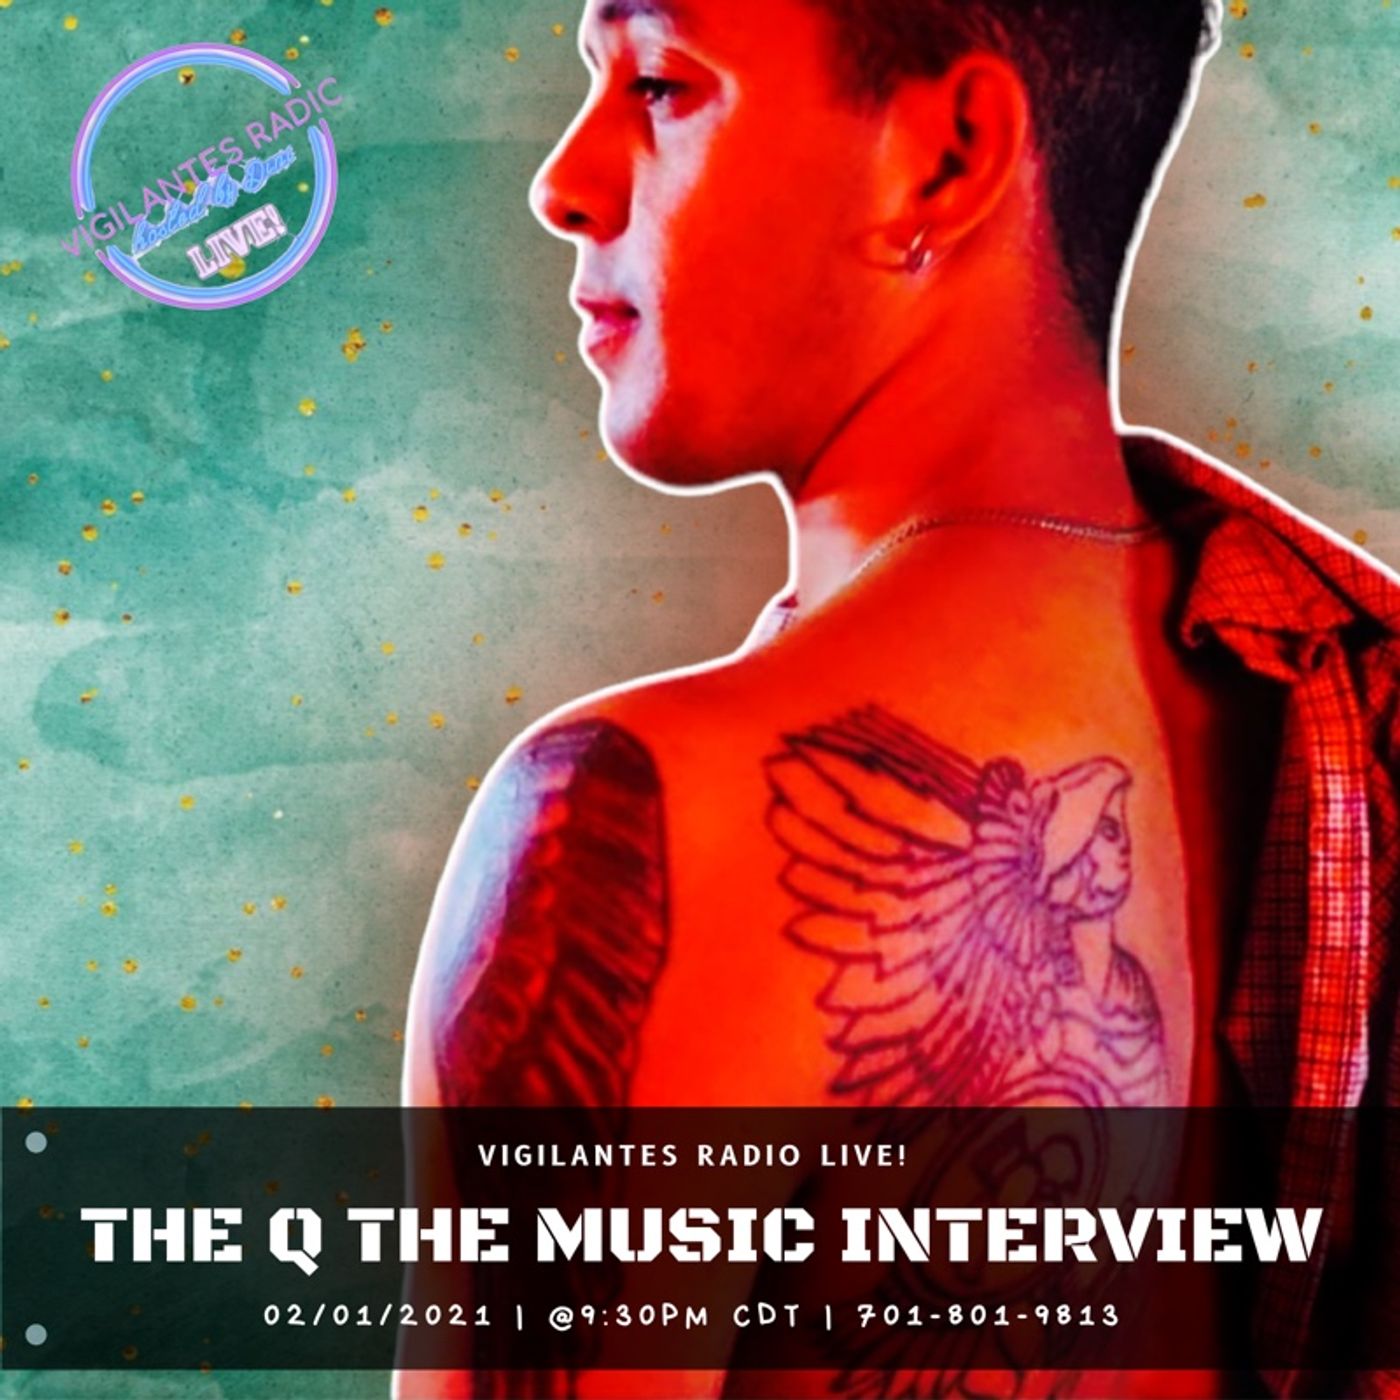 The Q The Music Interview. Image